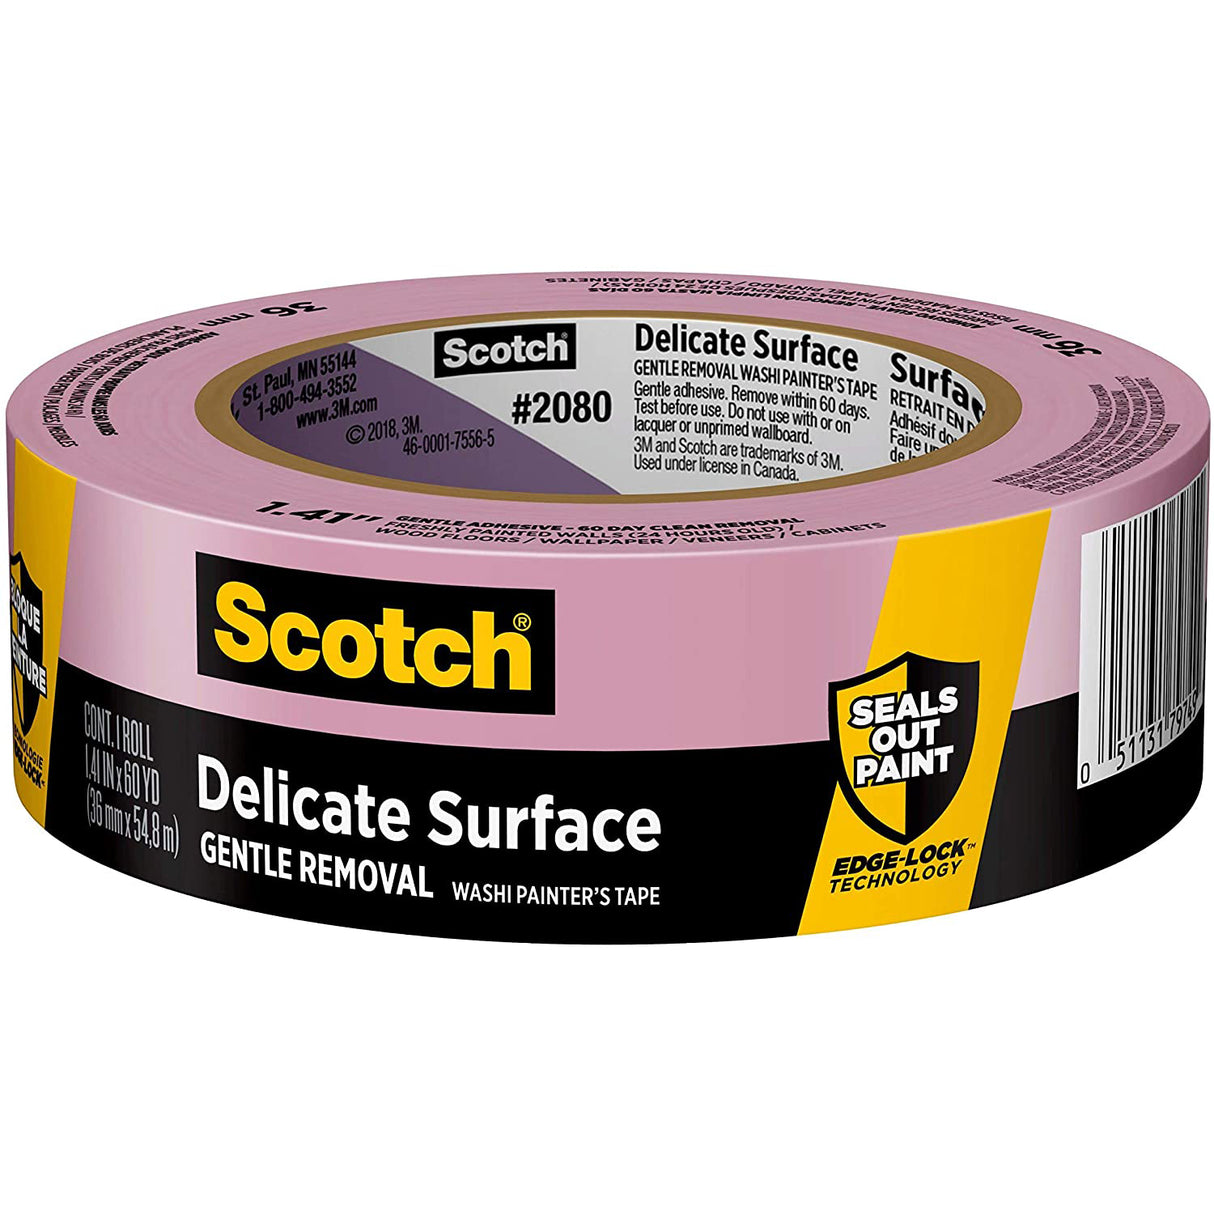 3M Scotch 1.41 in. x 60 yds. Delicate Surface Painter's Tape with Edge-Lock